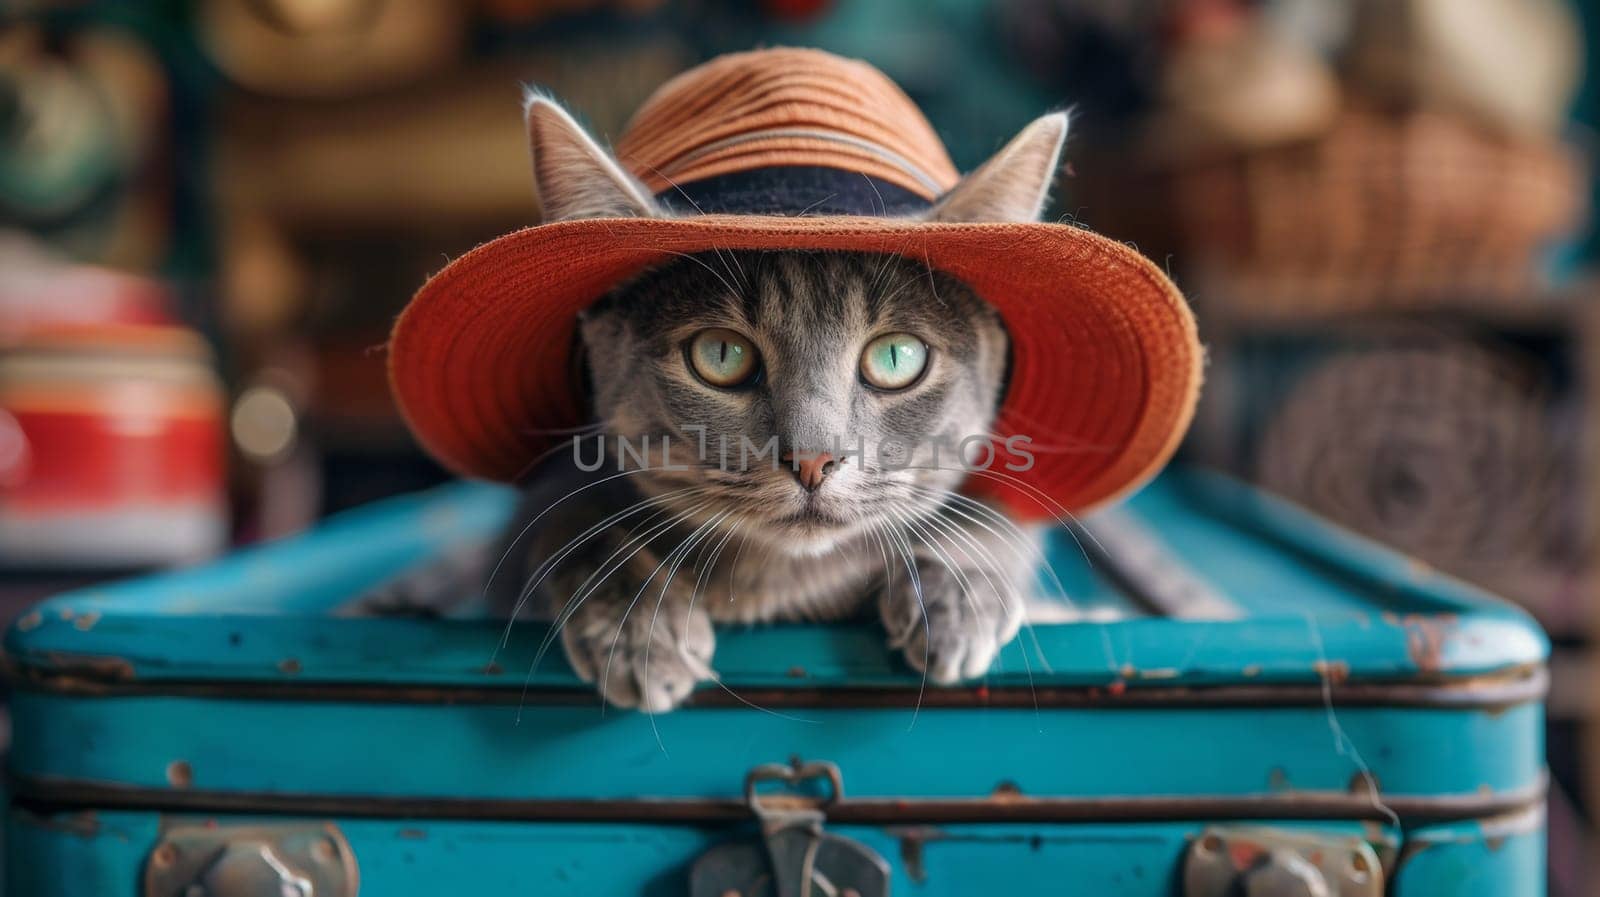 A cat wearing a hat sitting in an open suitcase